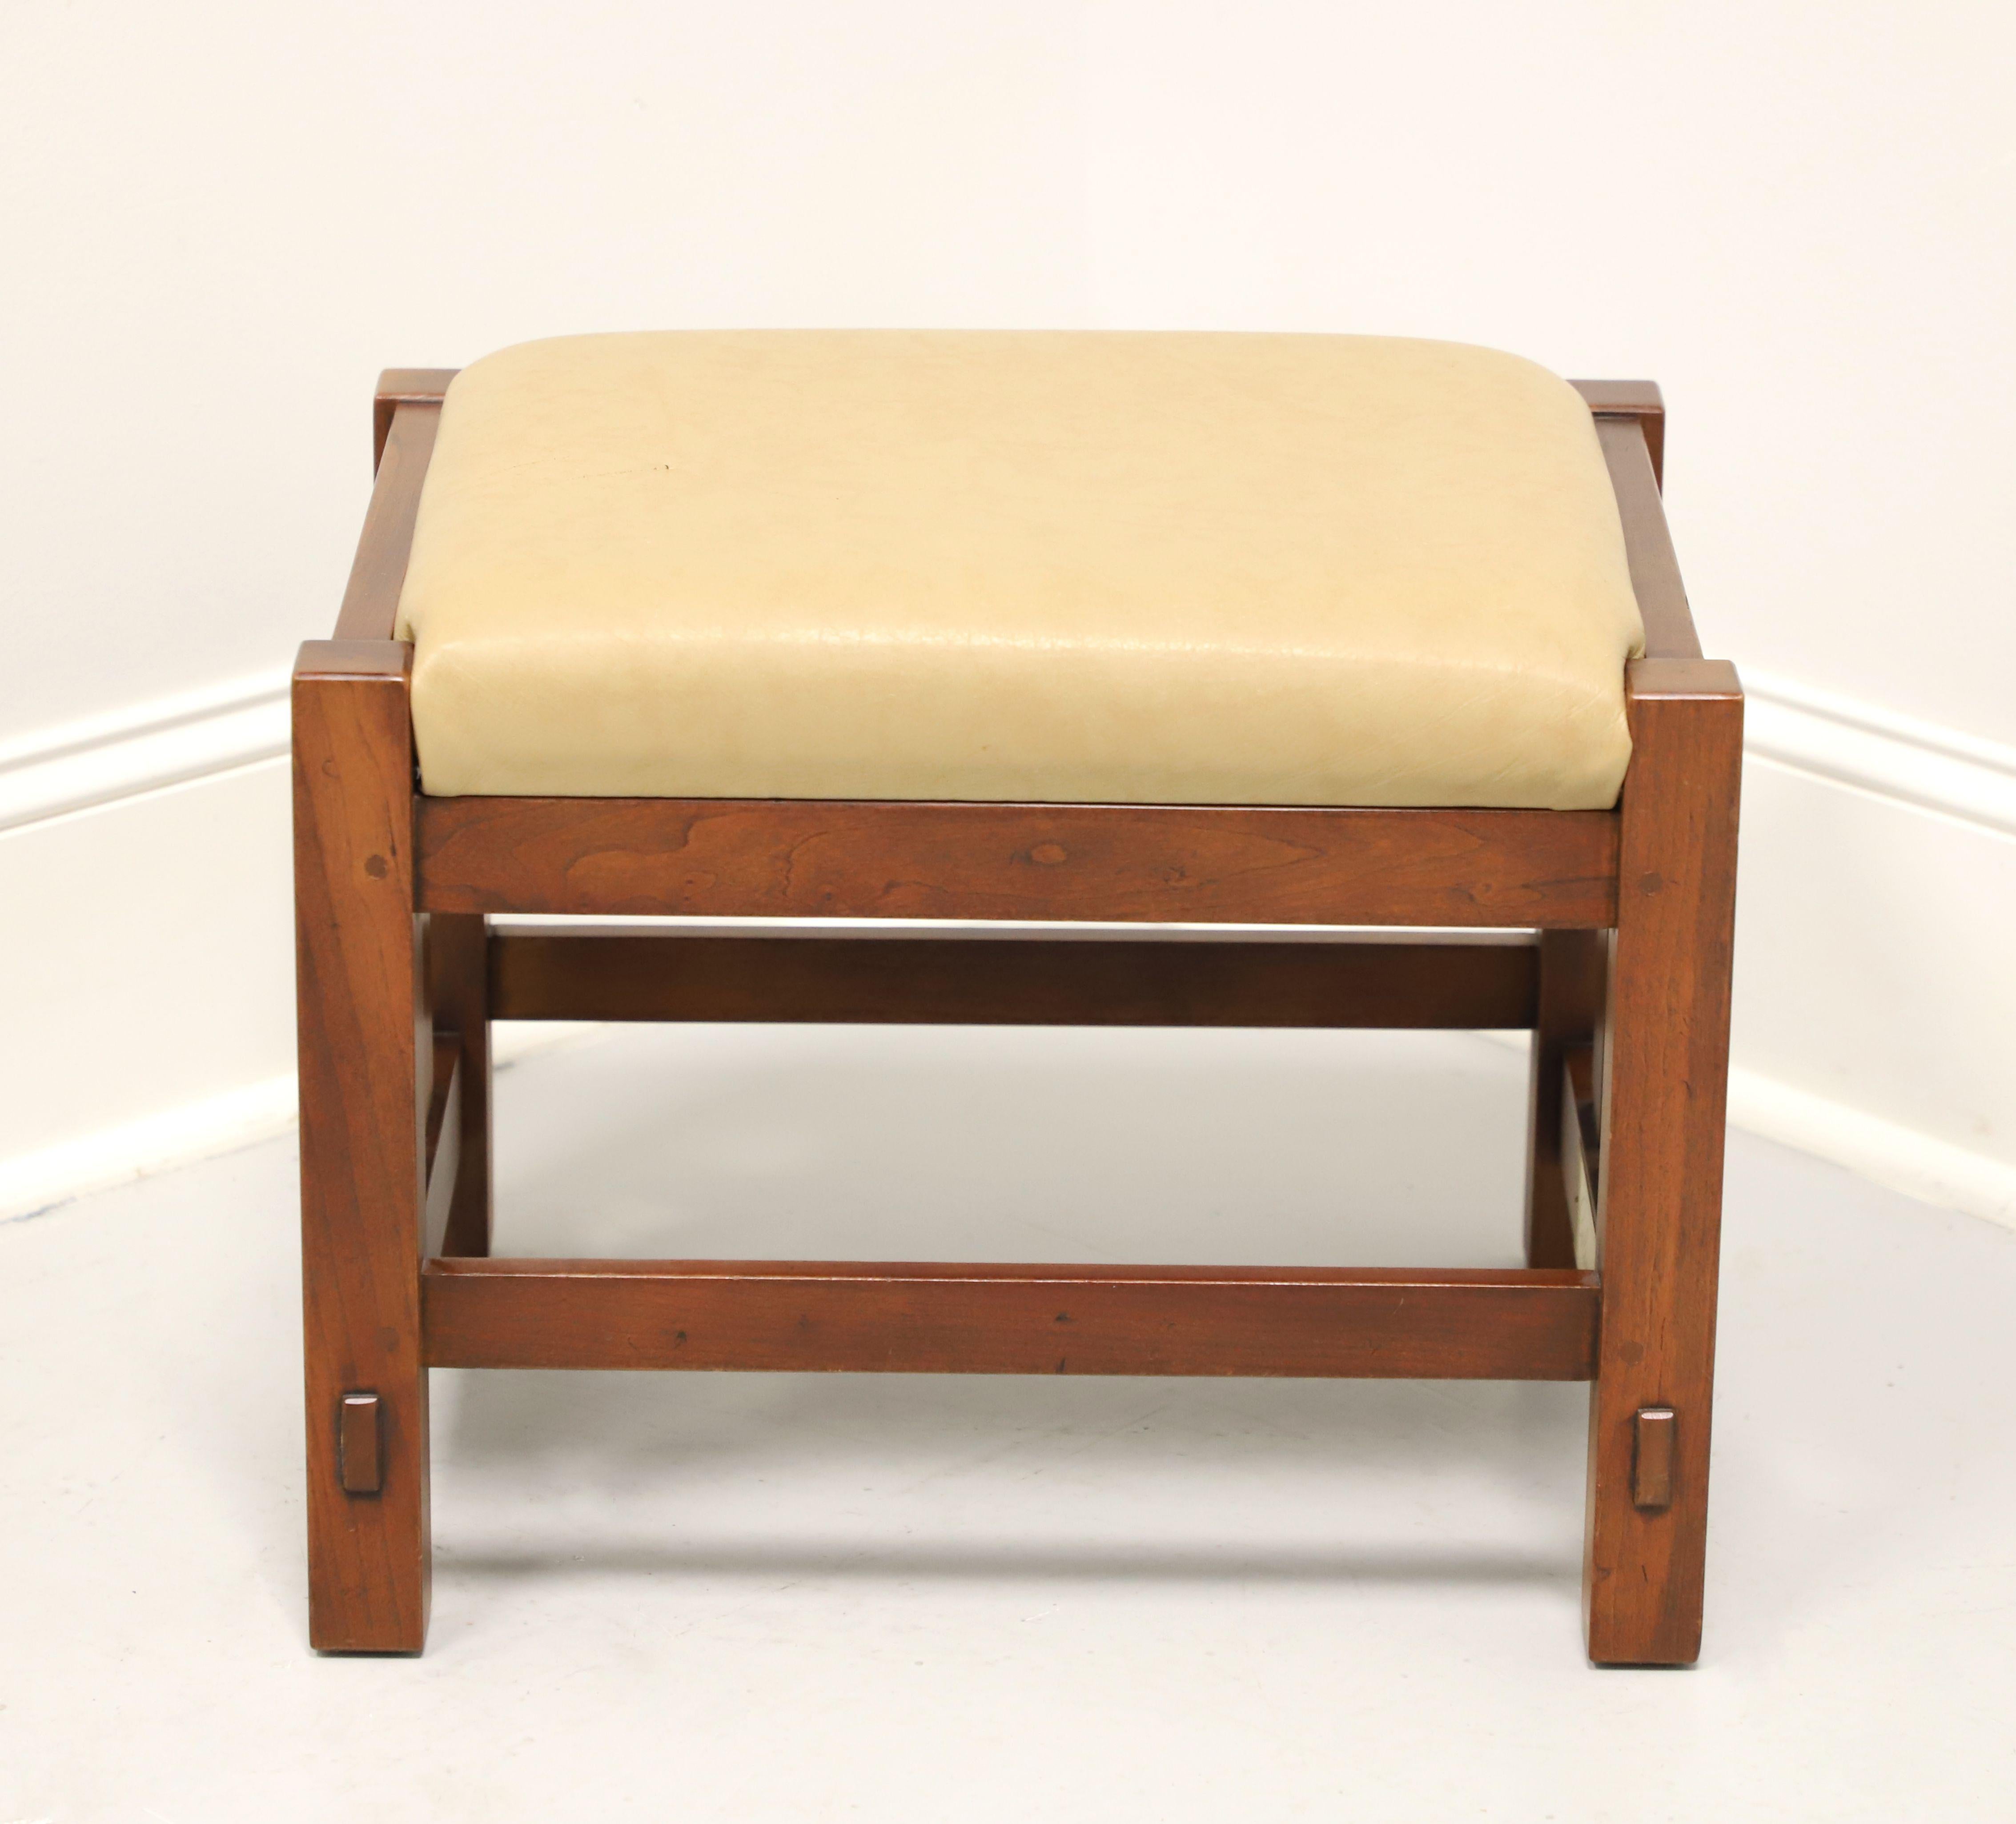 An Arts & Crafts Mission style footstool by Stickley Furniture. Solid cherry wood, tan color leather upholstered seat, slatted sides, stretchers, and square straight legs. Made in Manilas, New York, USA, circa 1996.

Style #: 